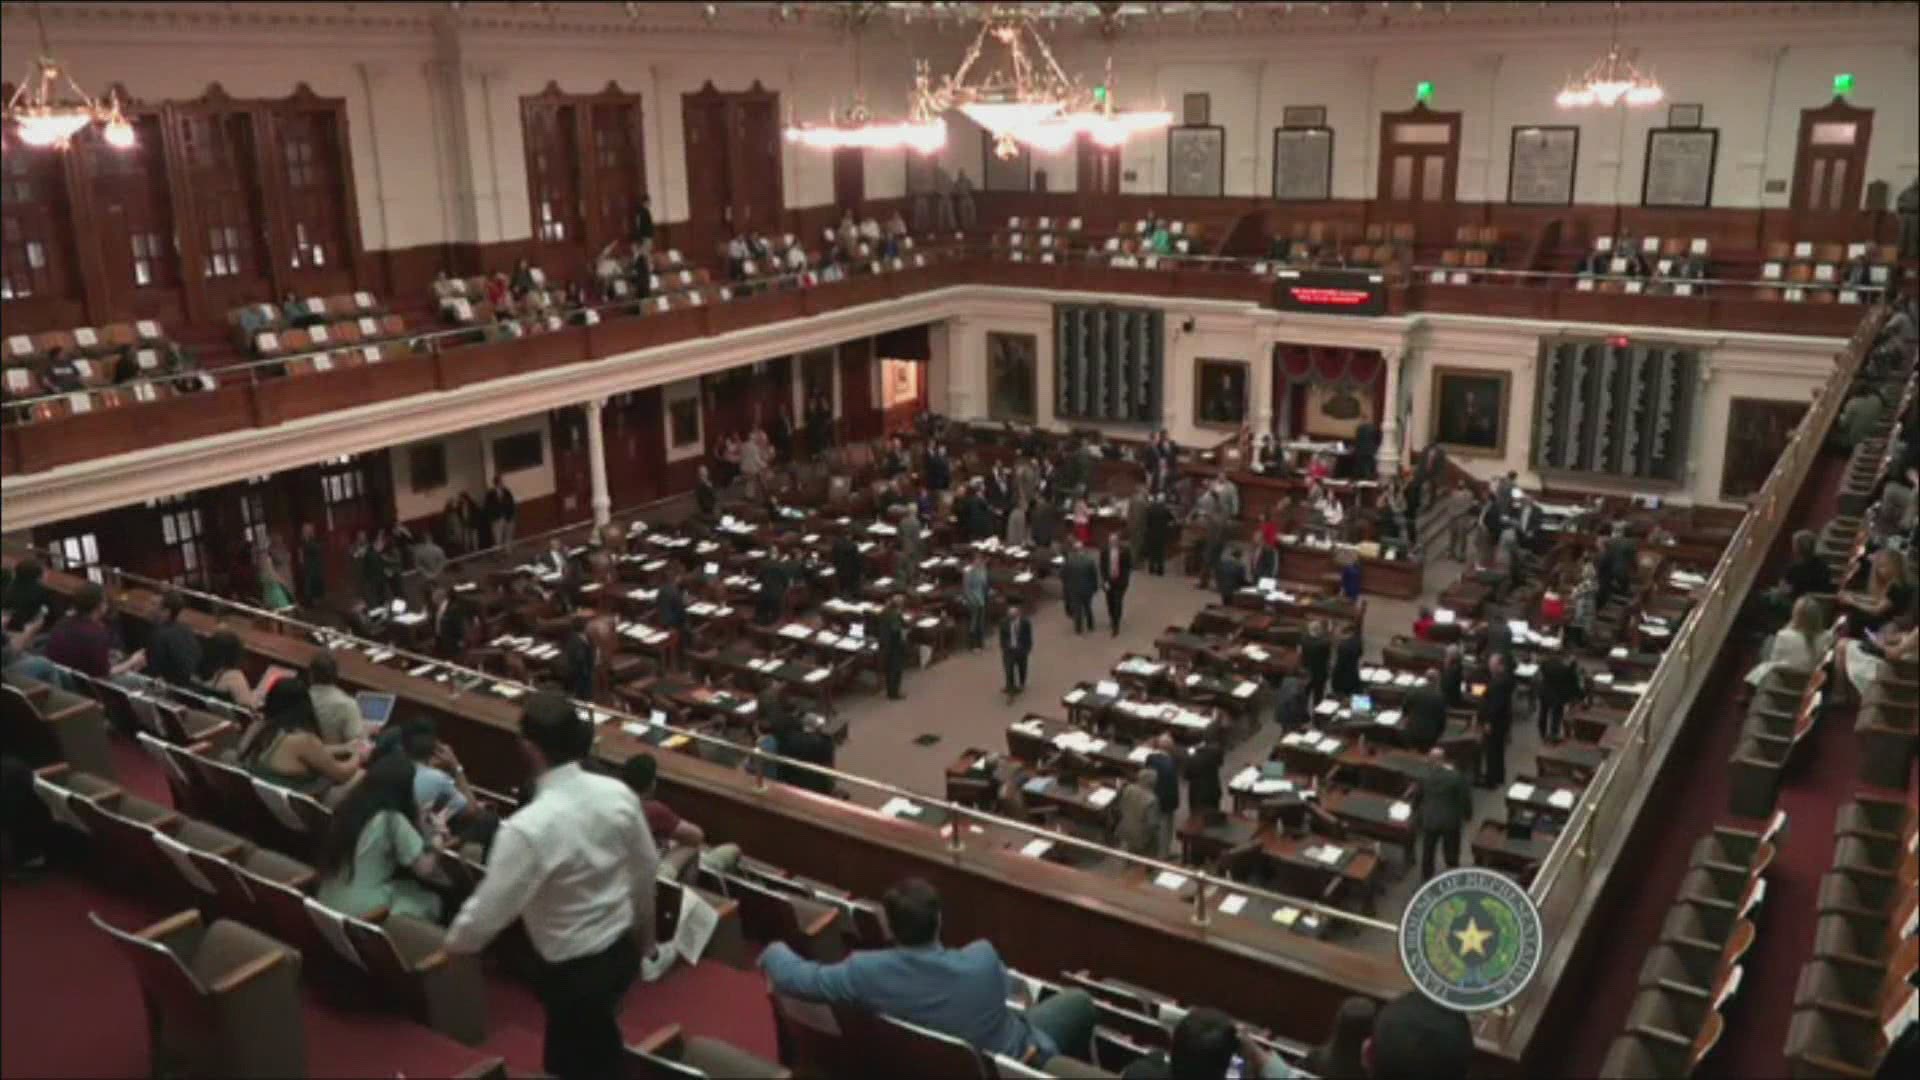 Texas Senate Bill 7 has remained controversial as new voting restrictions remain at the center of the legislation.